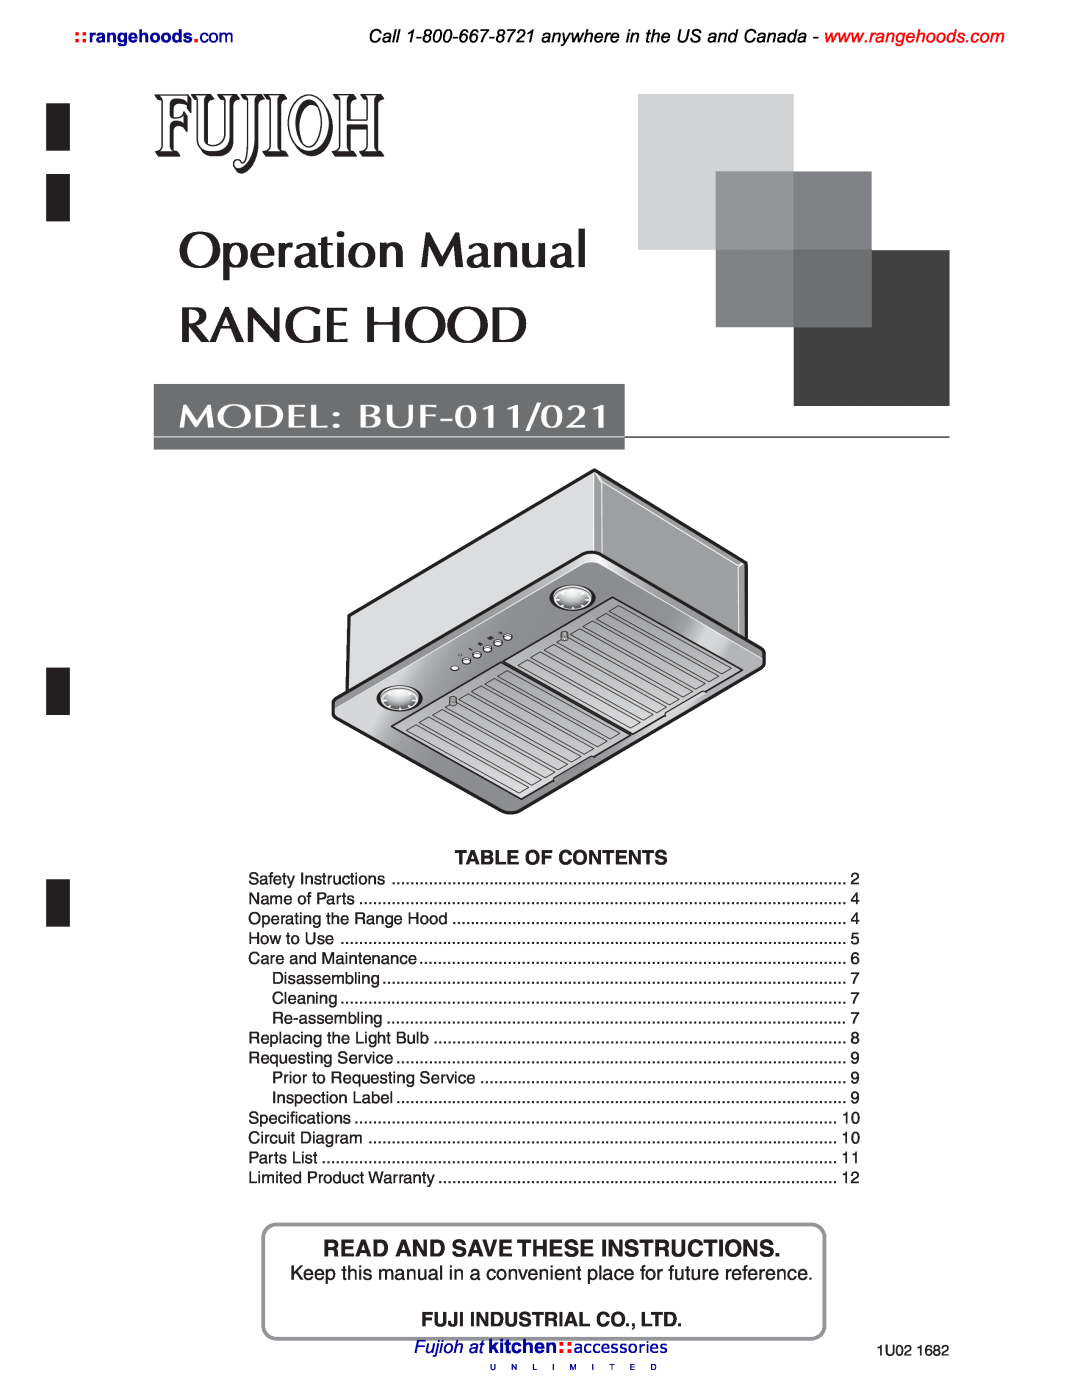 Fujioh operation manual Table Of Contents, MODEL BUF-011/021, Read And Save These Instructions, rangehoods . com 